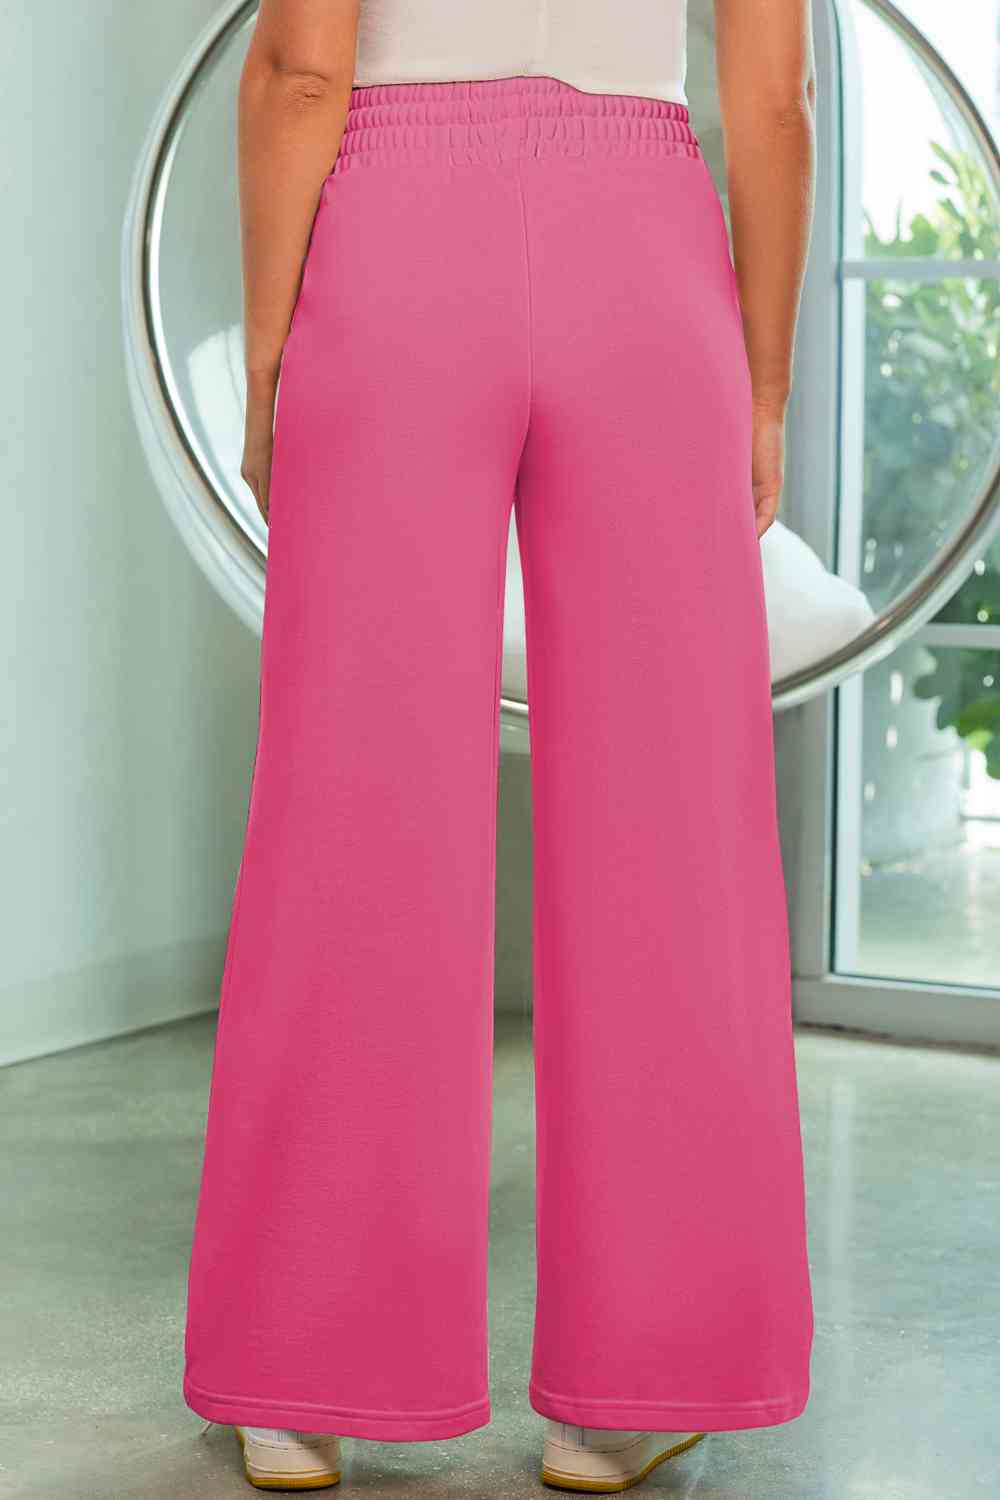 Pale Violet Red Drawstring Wide Leg Pants with Pockets Sentient Beauty Fashions Apparel & Accessories